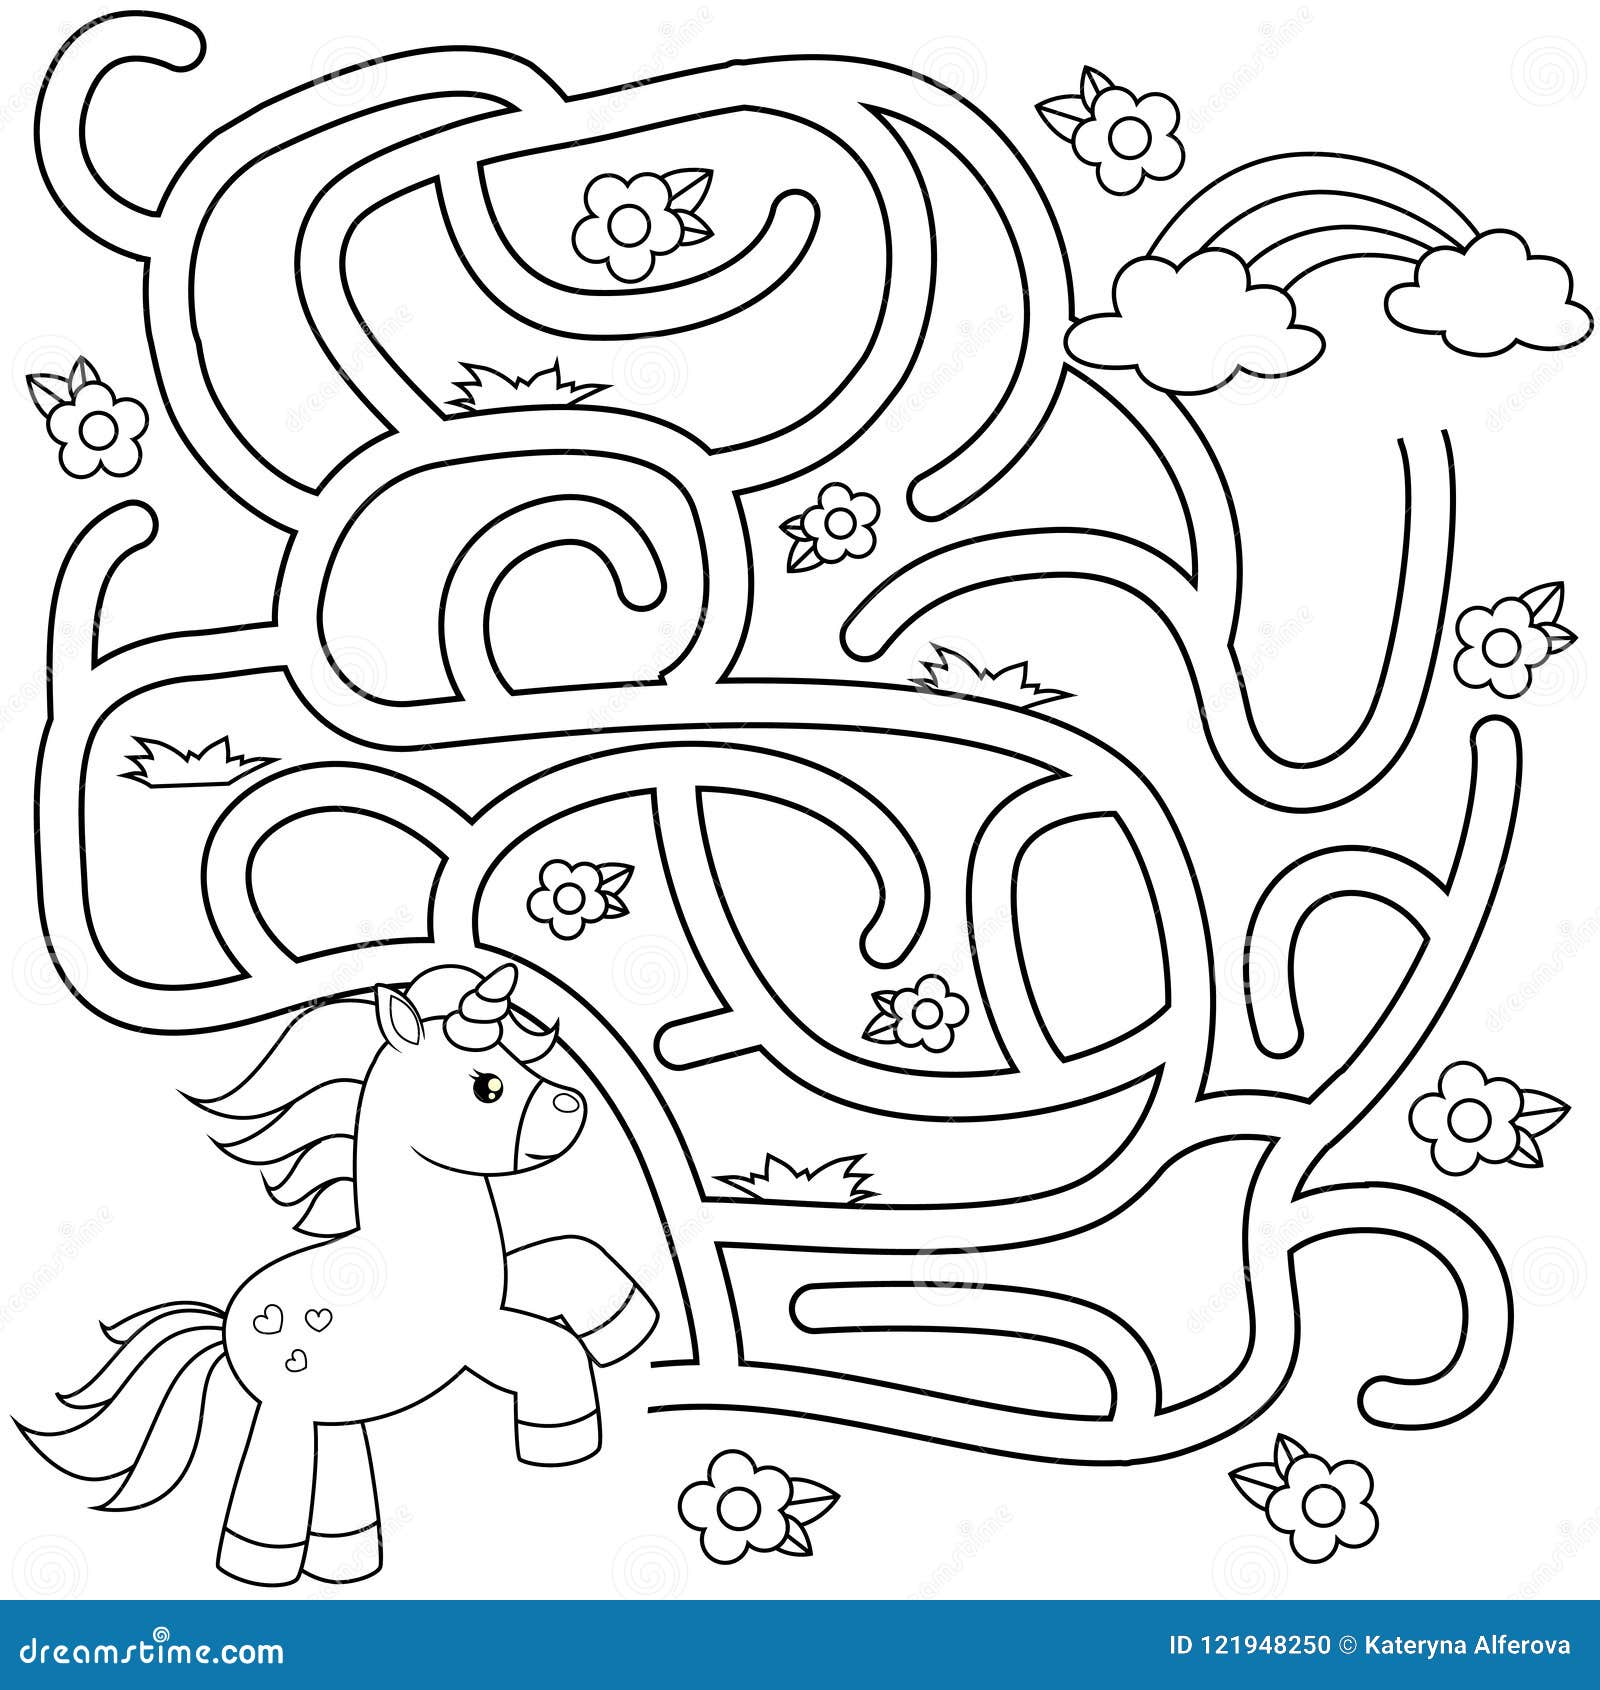 Help Unicorn Find Path To Rainbow. Labyrinth. Maze Game For Kids. Black And White Vector ...